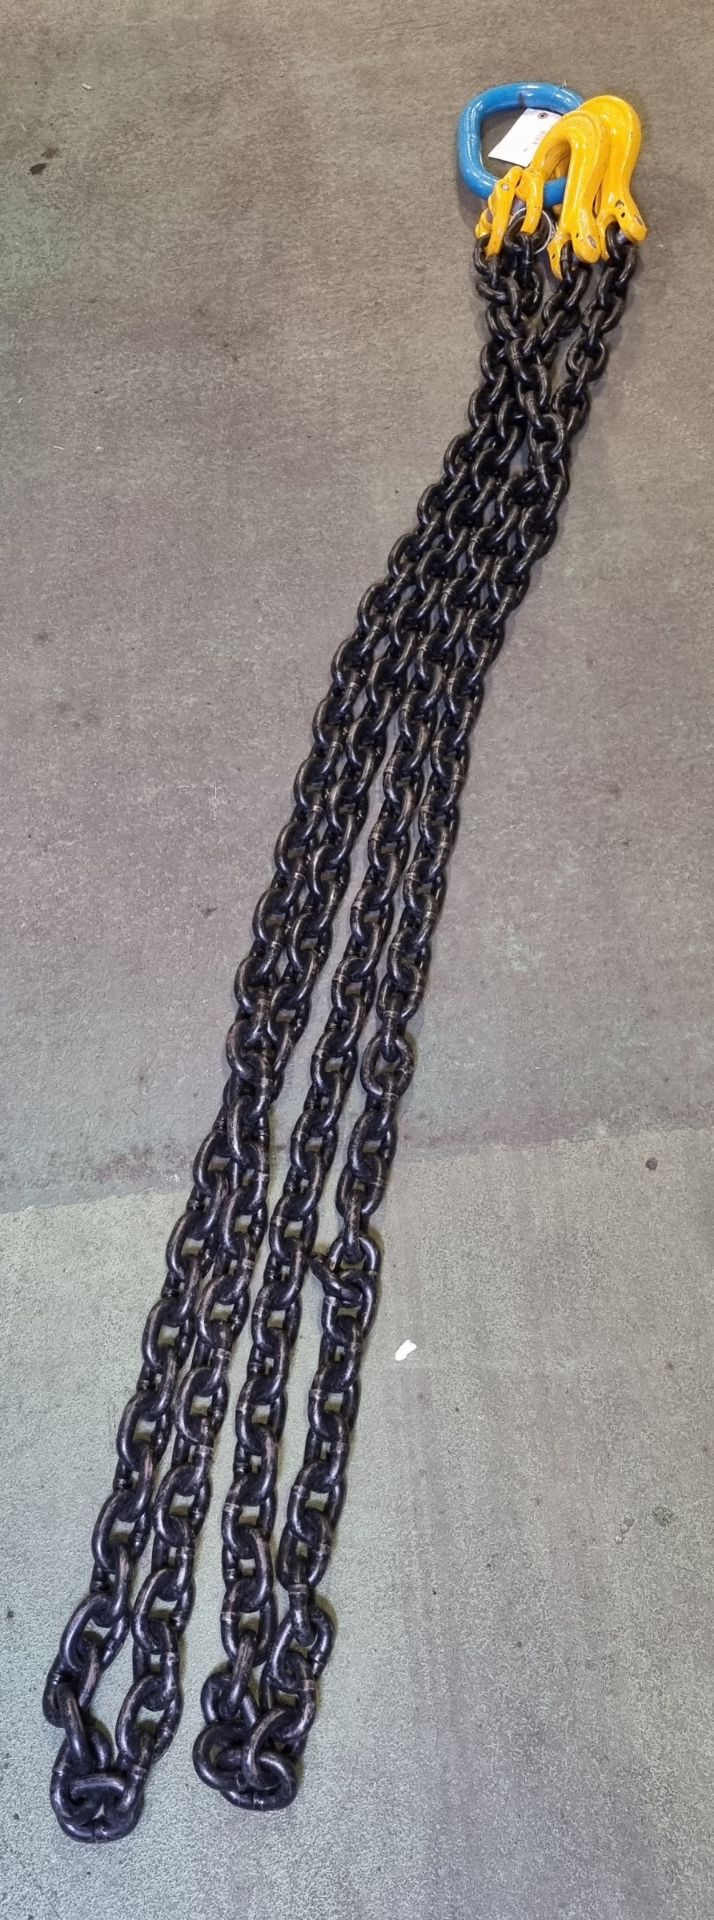 13mm multi leg chain sling with master link and hooks